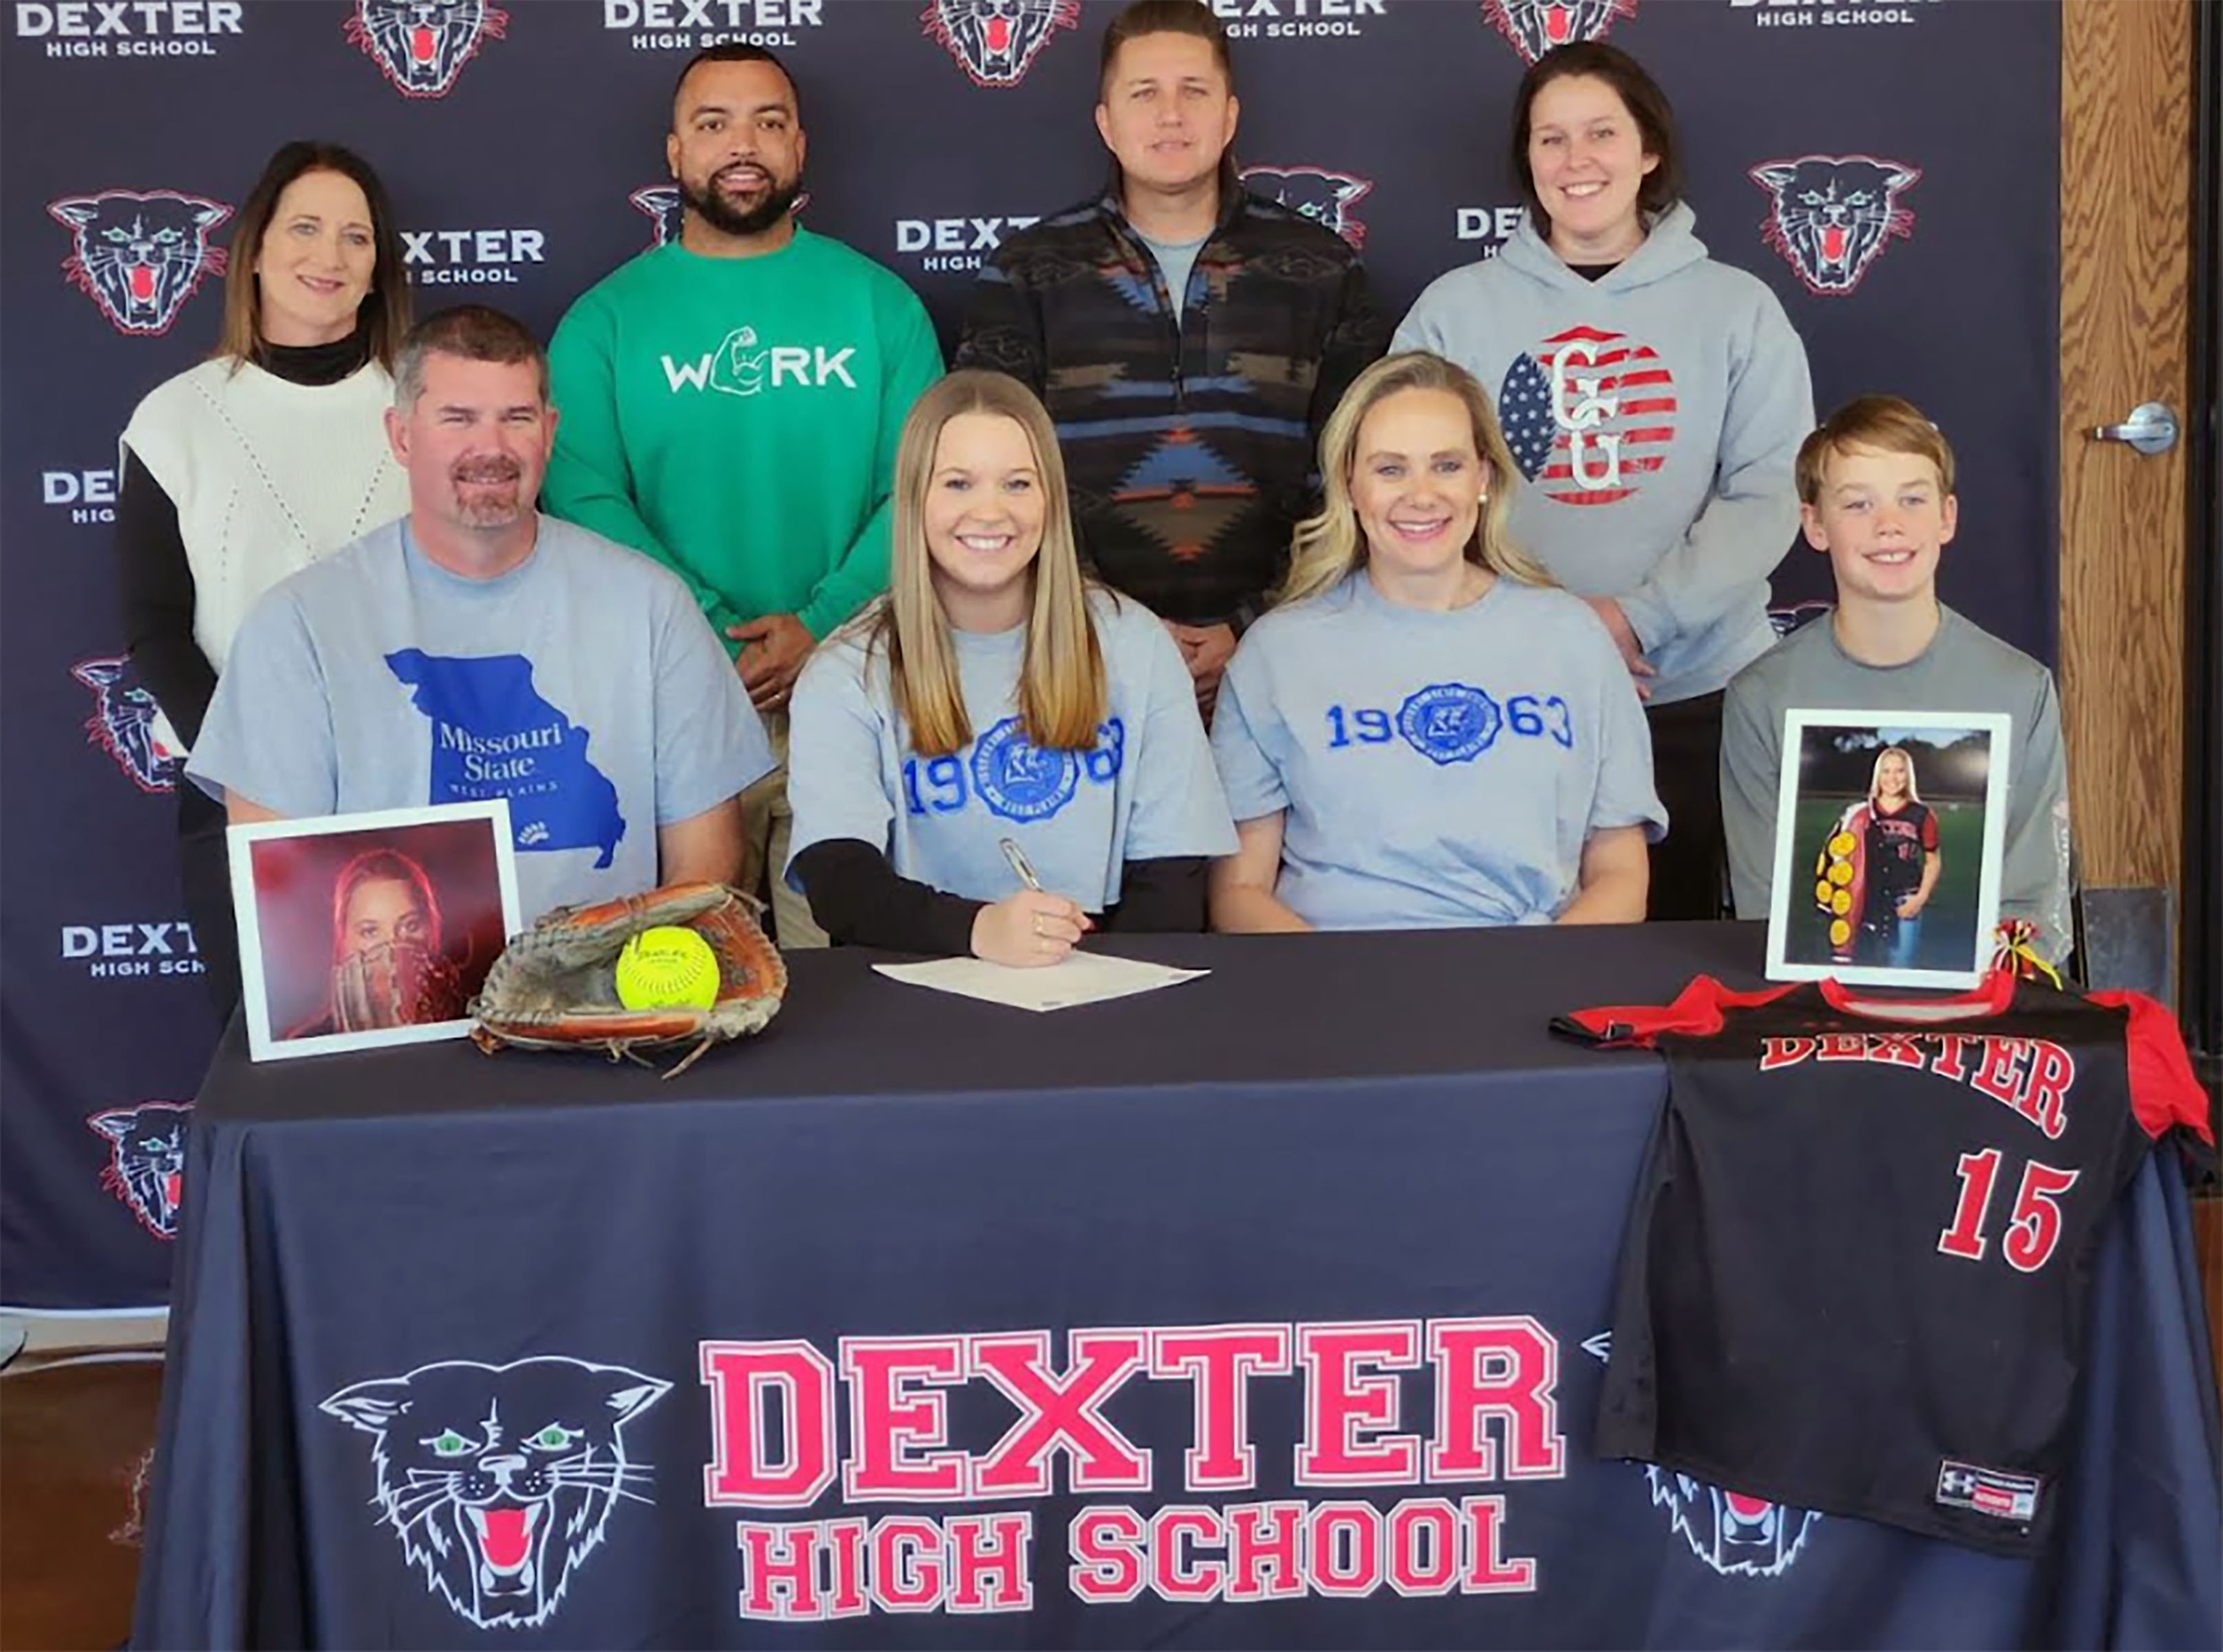 Amelia Jenkins, seated second from left, recently signed a national letter of intent to play for the Grizzly Softball team beginning in fall 2024. With Jenkins above are her father Erik Jenkins, mother Christina Jenkins, brother Drake Jenkins, and her Dexter High School coaches Starla Pulley, Tony Turner, Adam Neal and Chelsea Hoggard. (Photo provided)